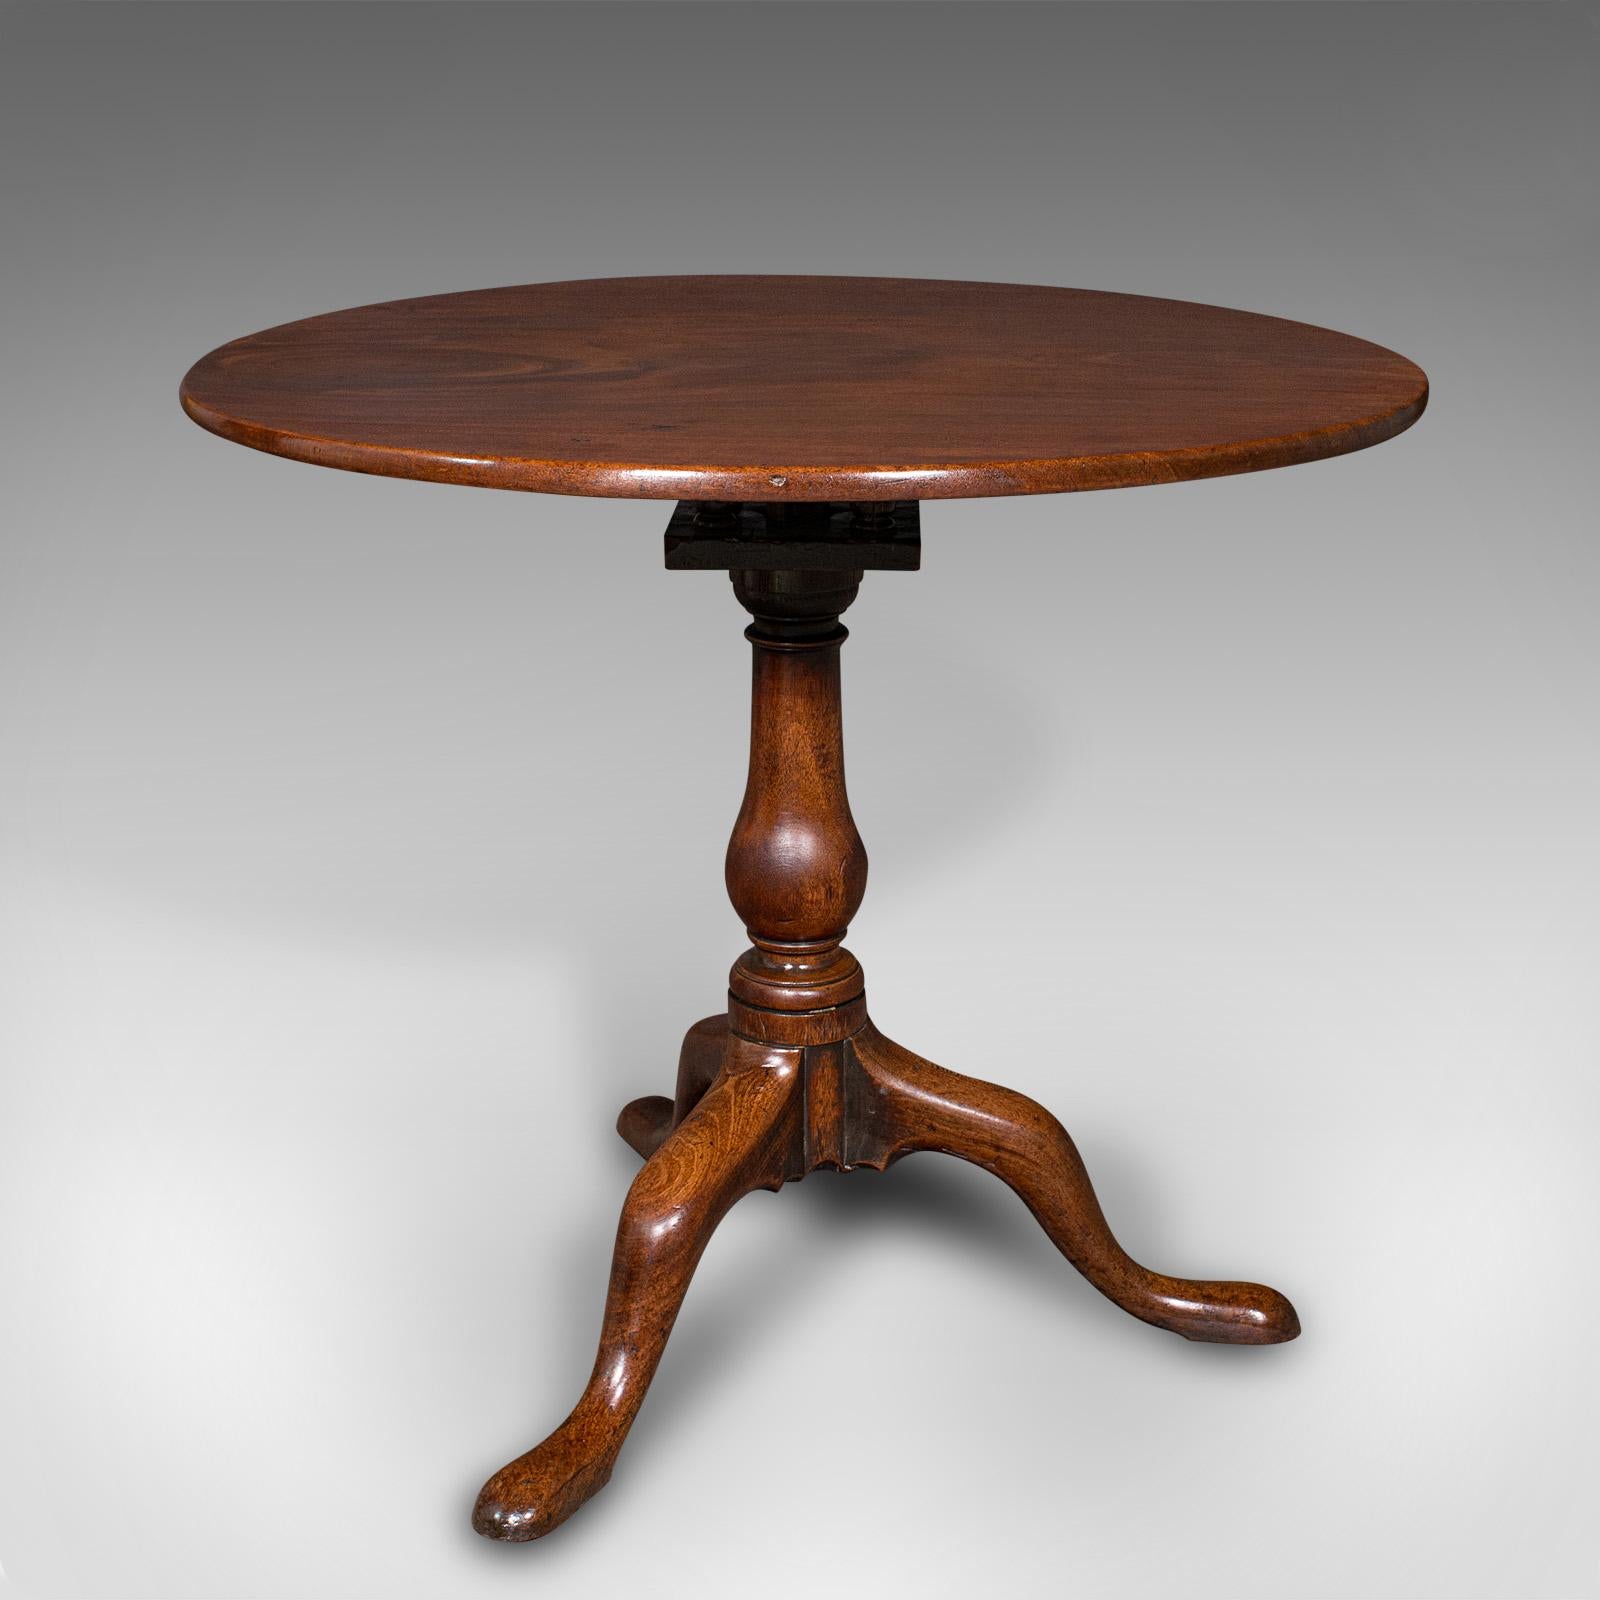 Wood Antique Tilt Top Table, English, Mahogany, Side, Lamp, Rotary, Georgian, C.1760 For Sale